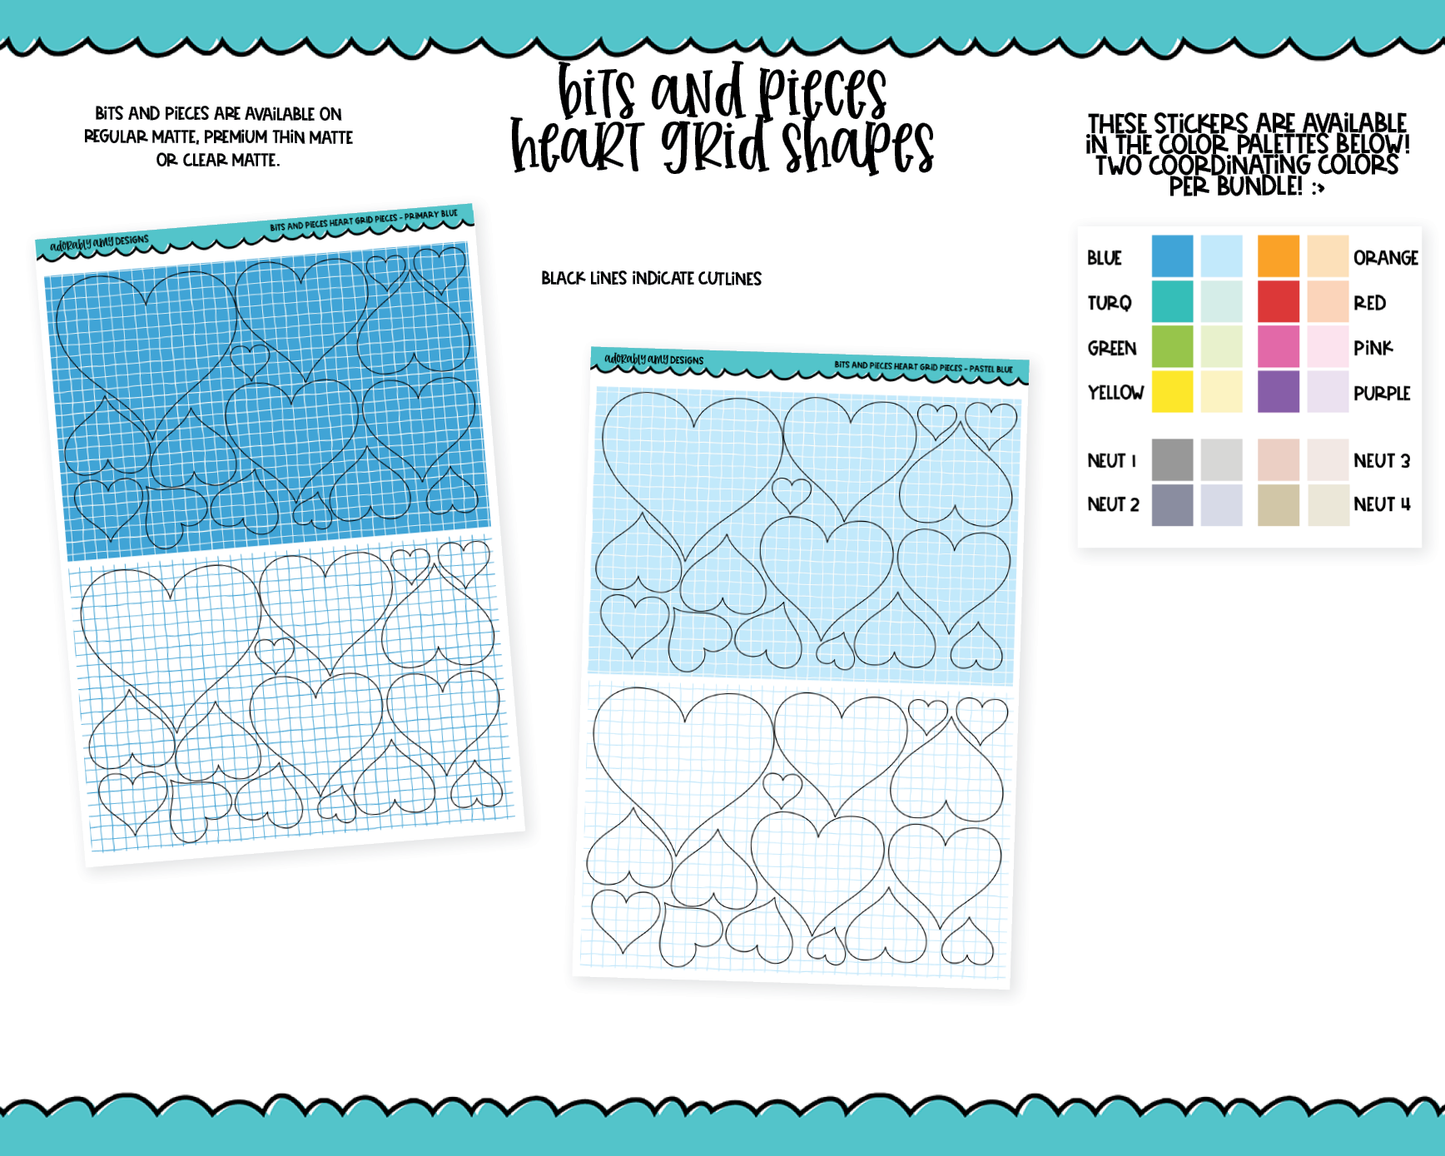 Bits & Pieces Heart Grid Shapes Kit Addons for Any Planner in 13 different Color Schemes